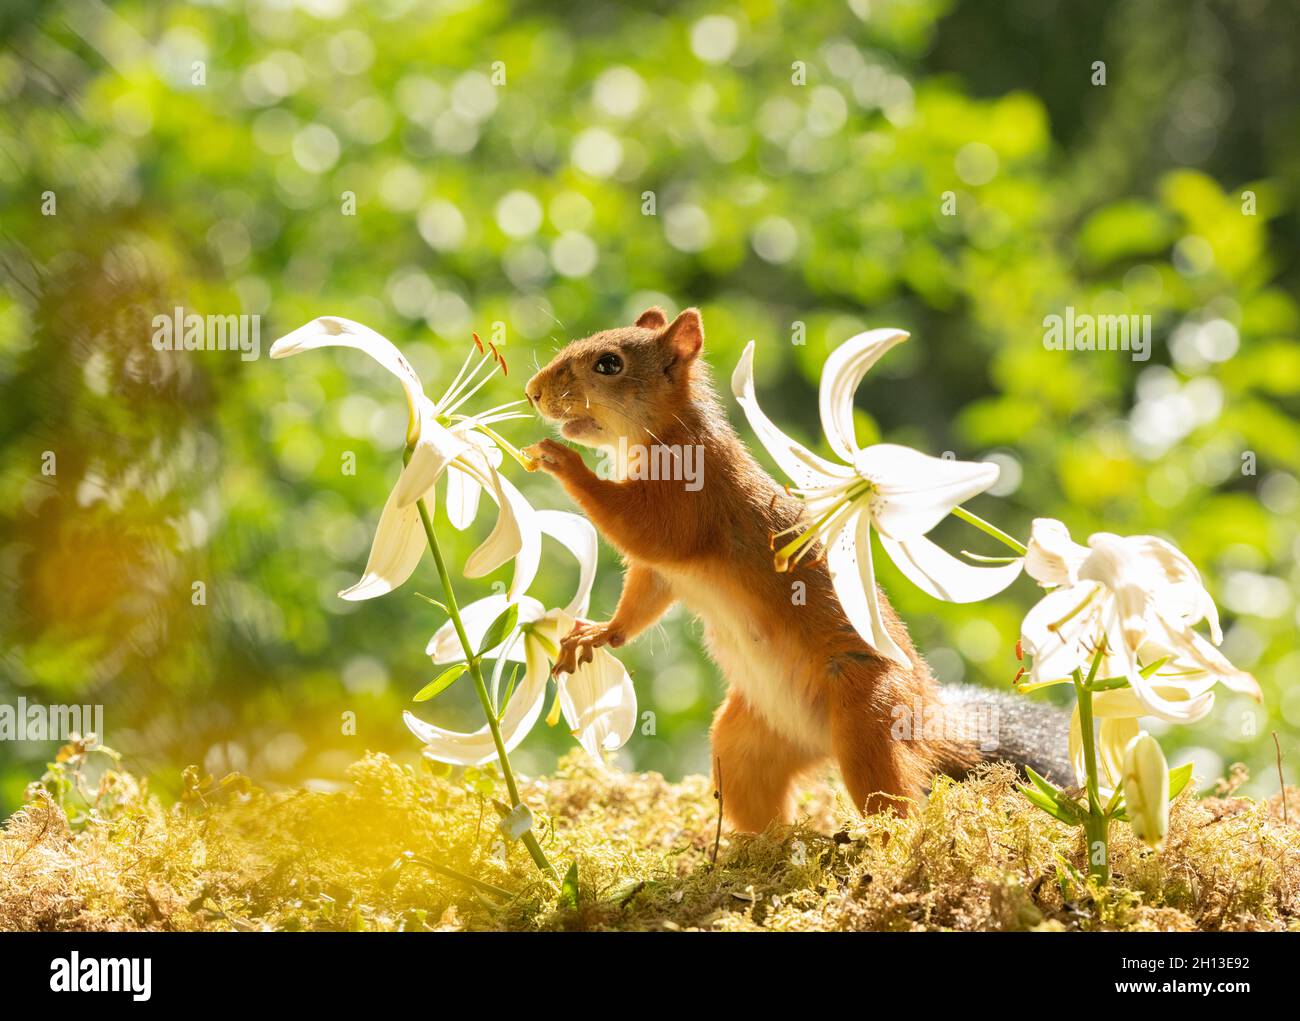 red squirrel is standing between and holding a white lily Stock Photo